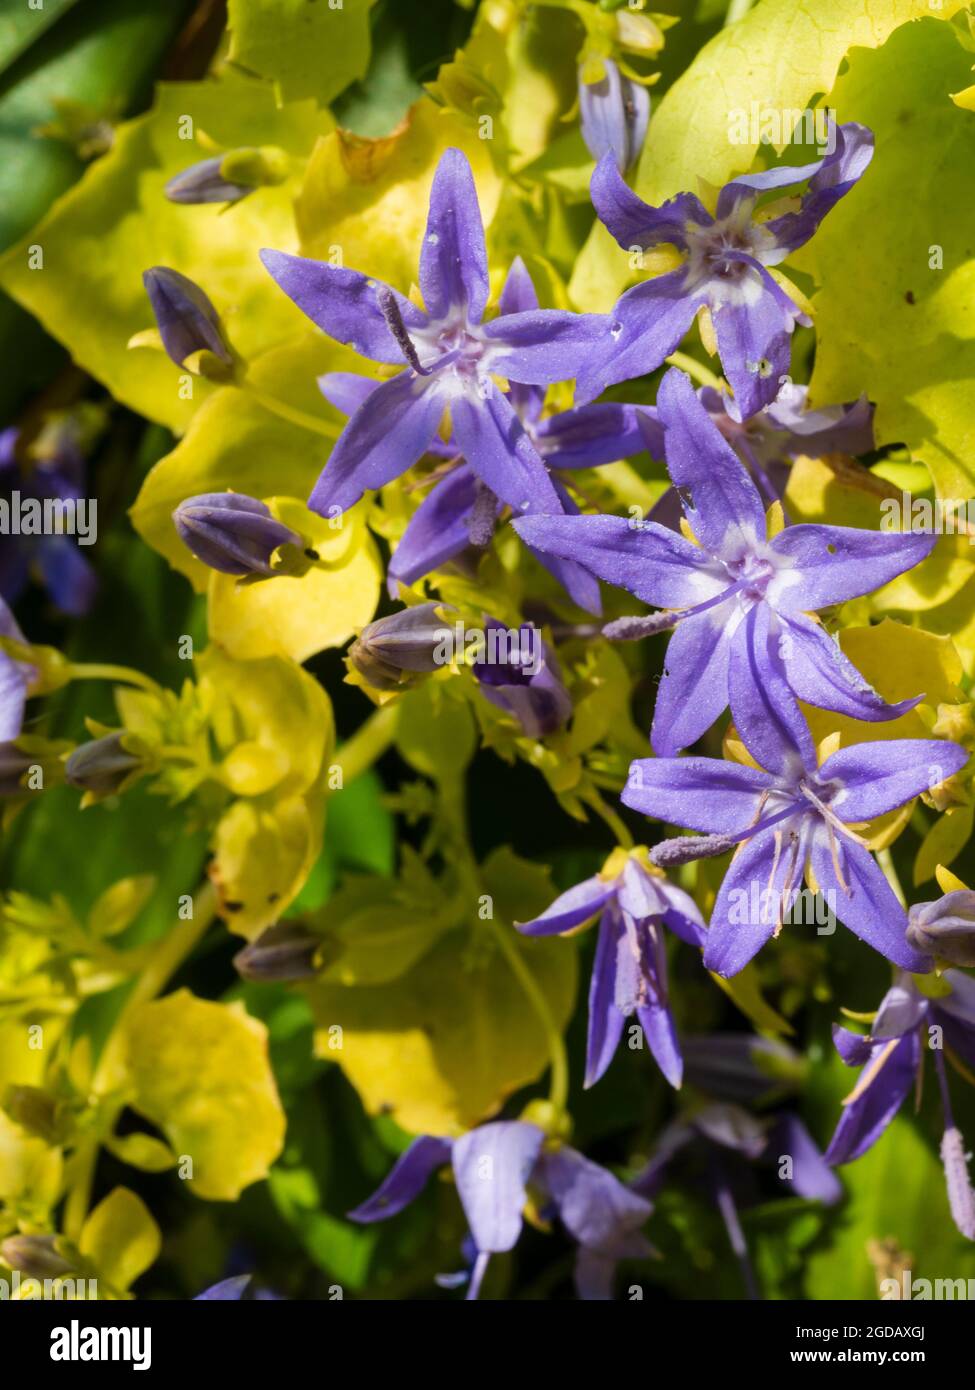 Yellow foliage and blue flowers of the midsummer blooming compact perennial, Campanula garganica 'Dickson's Gold' Stock Photo